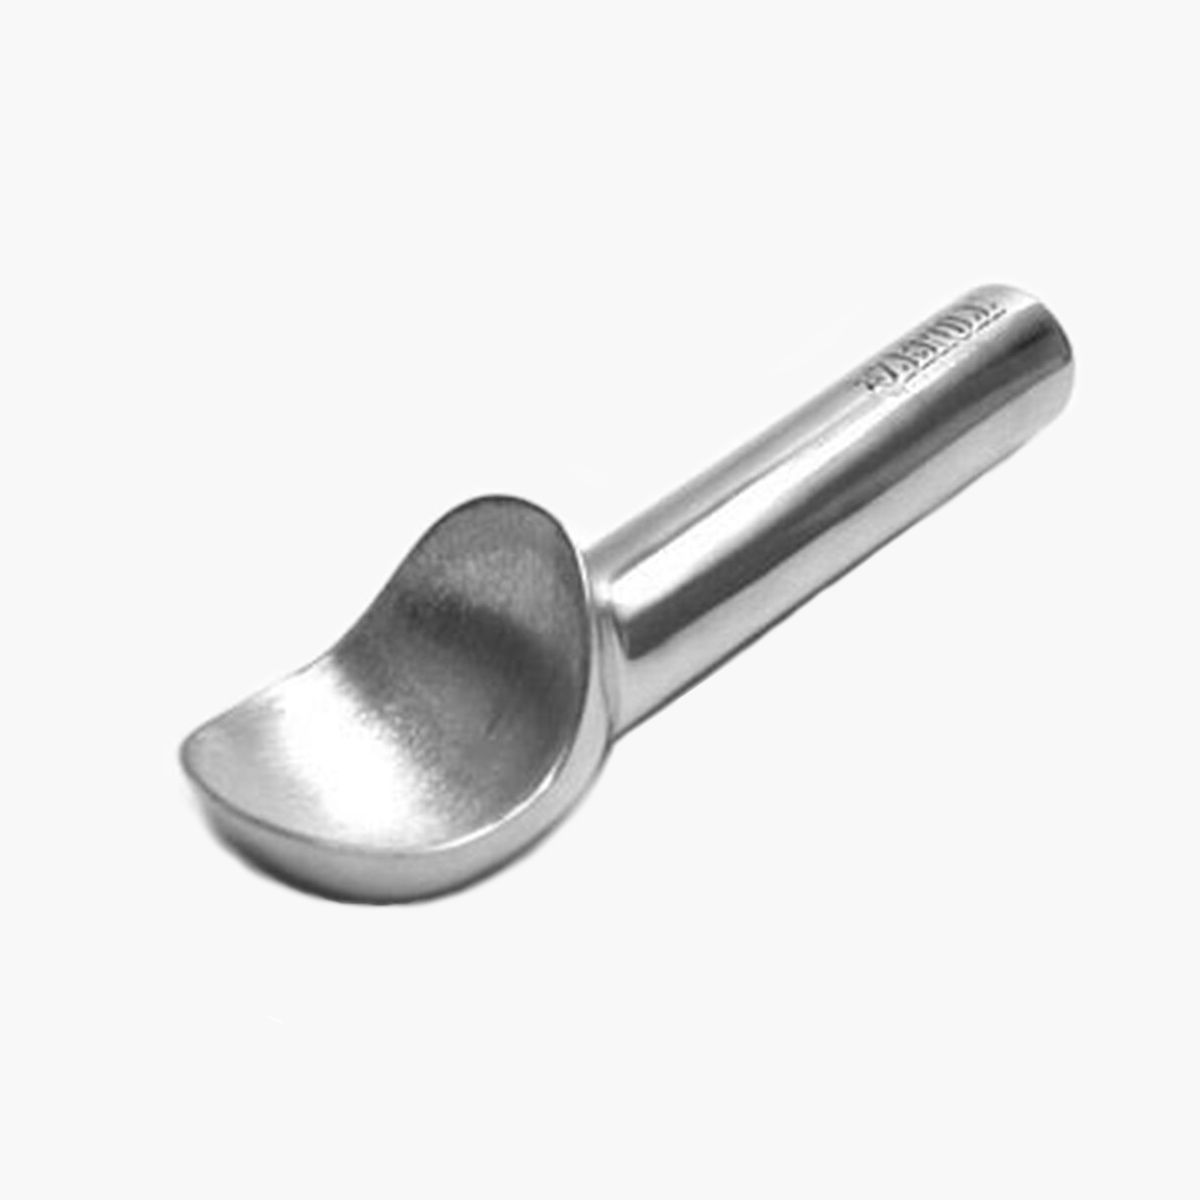 A stainless steel ice cream scoop.